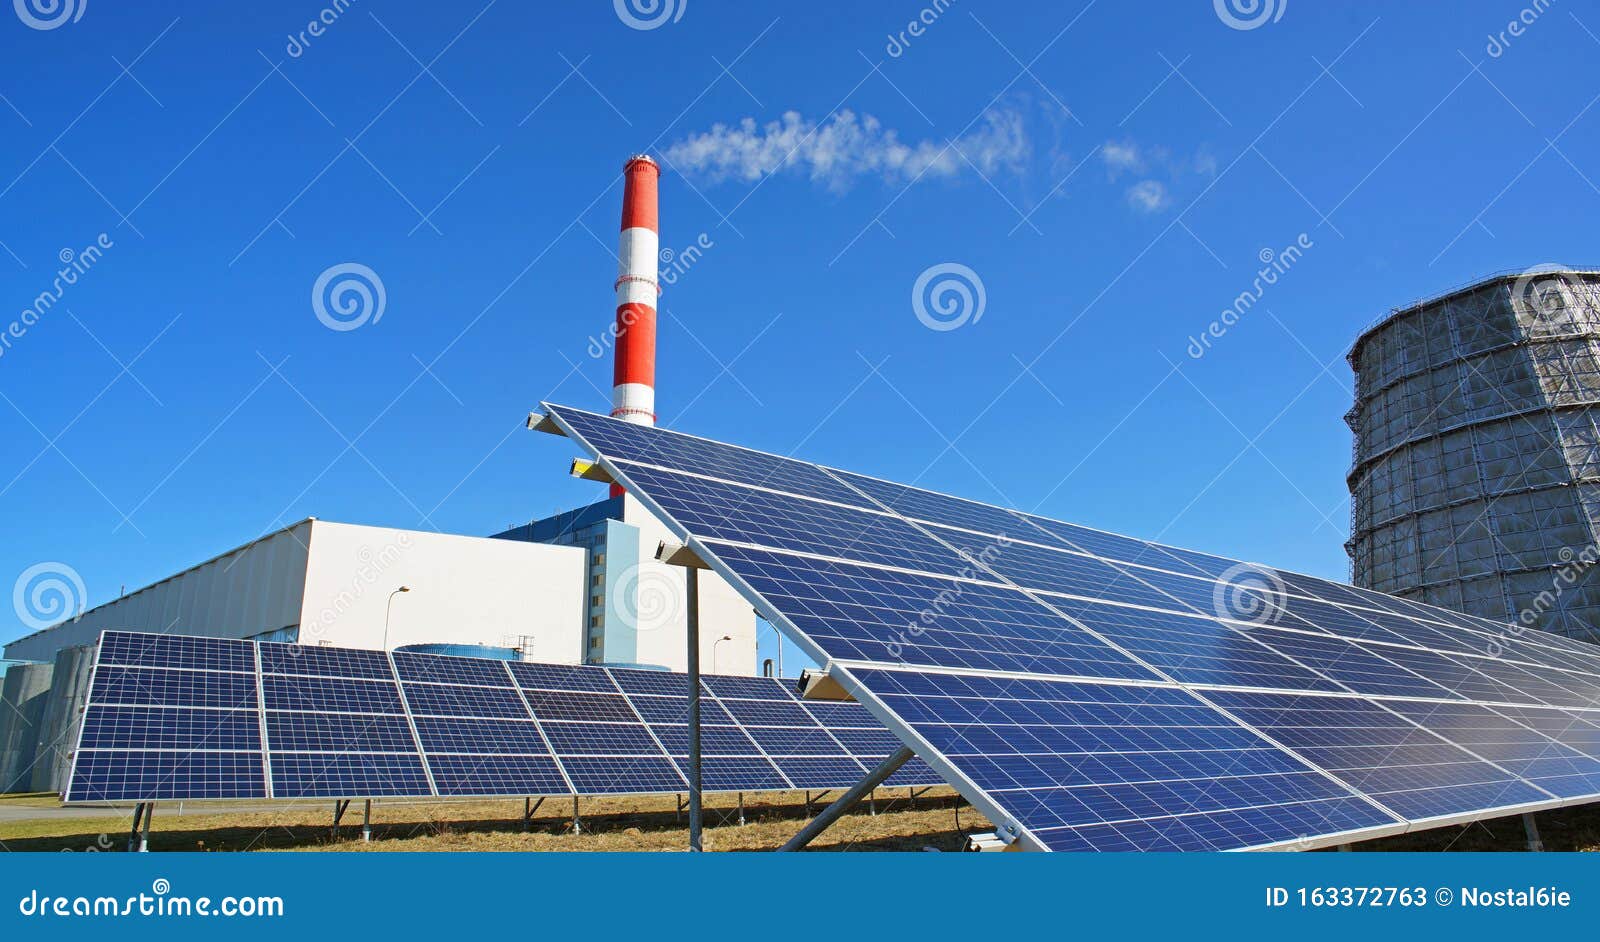 Solar Panel, Smokestack And Water Cooler At Power Plant Stock Image Image of energy